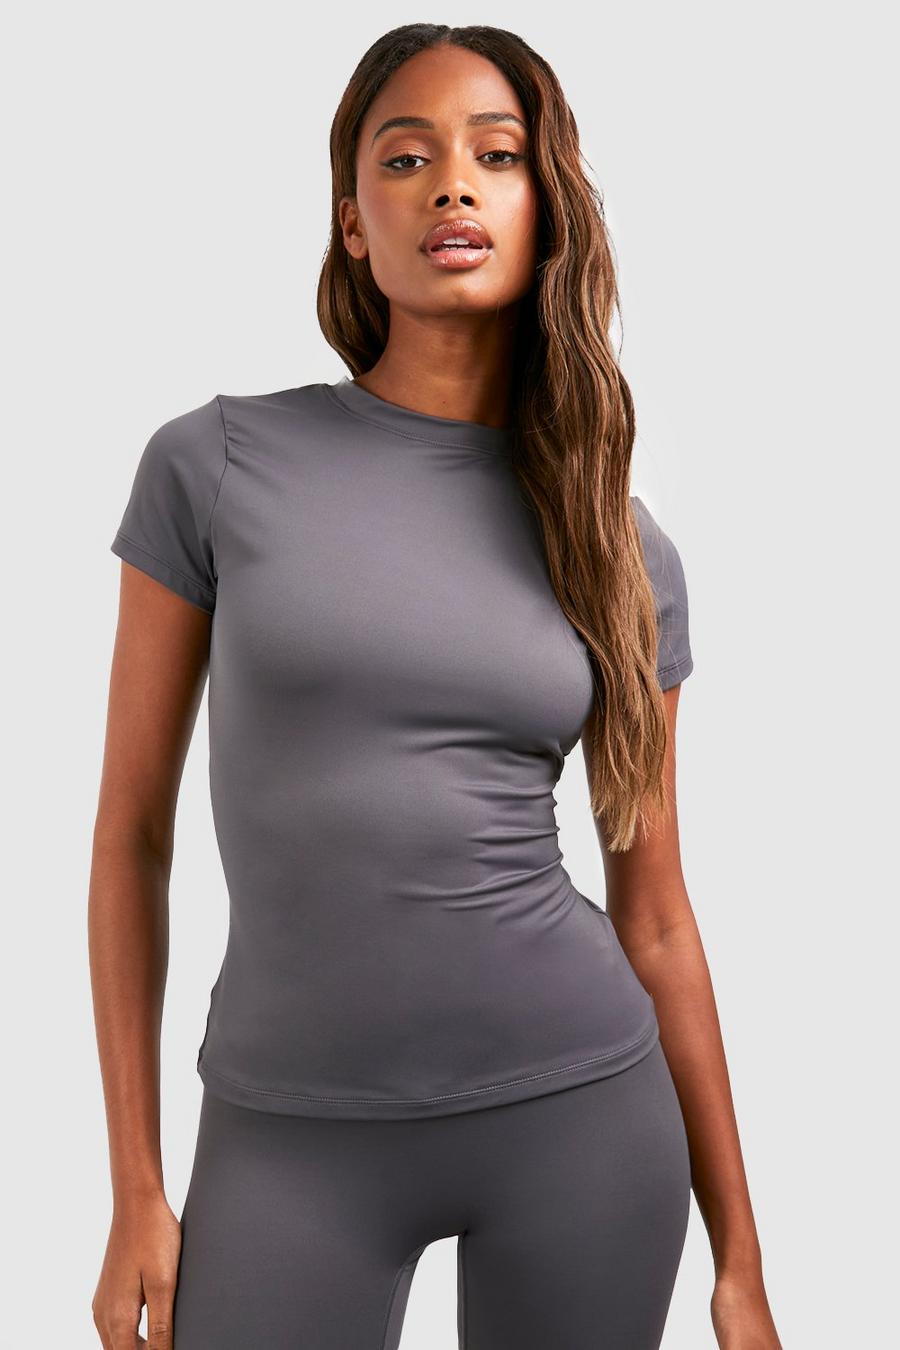 Charcoal DSGN Studio Supersoft Peached Sculpt Top image number 1